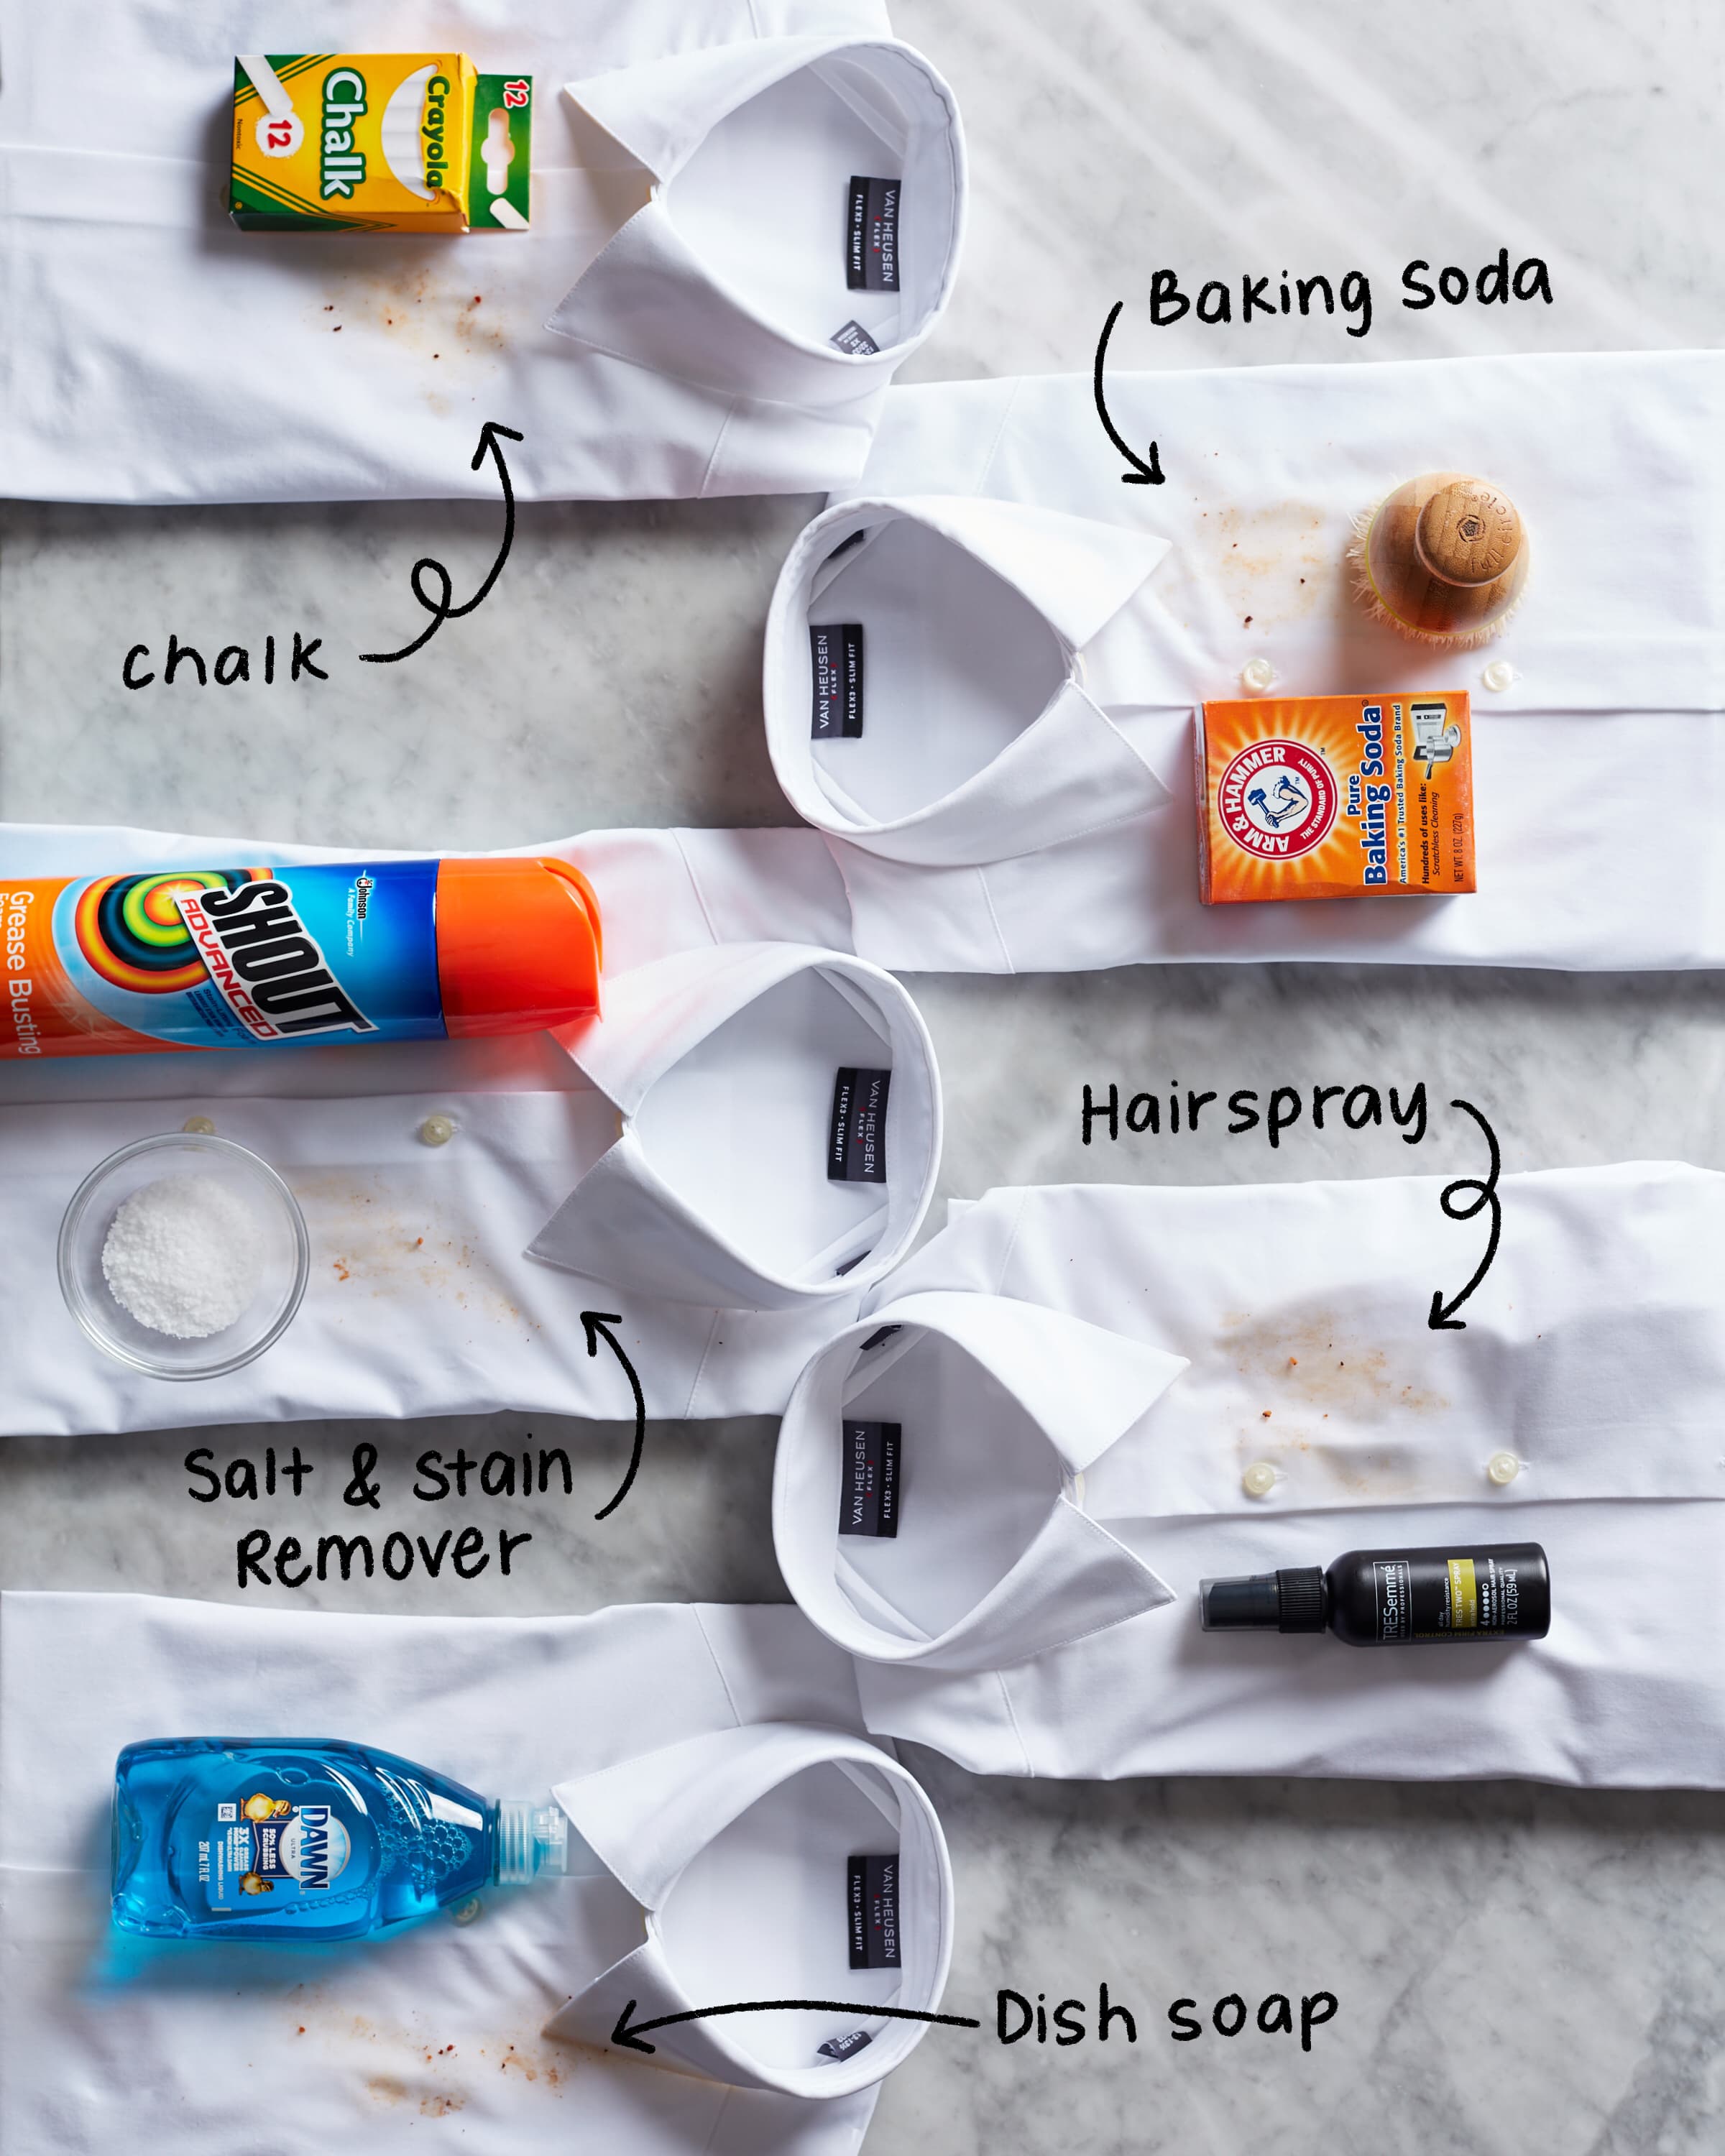 hierarki Rettsmedicin locker Best Way to Get Grease Stains Out of Clothing | The Kitchn